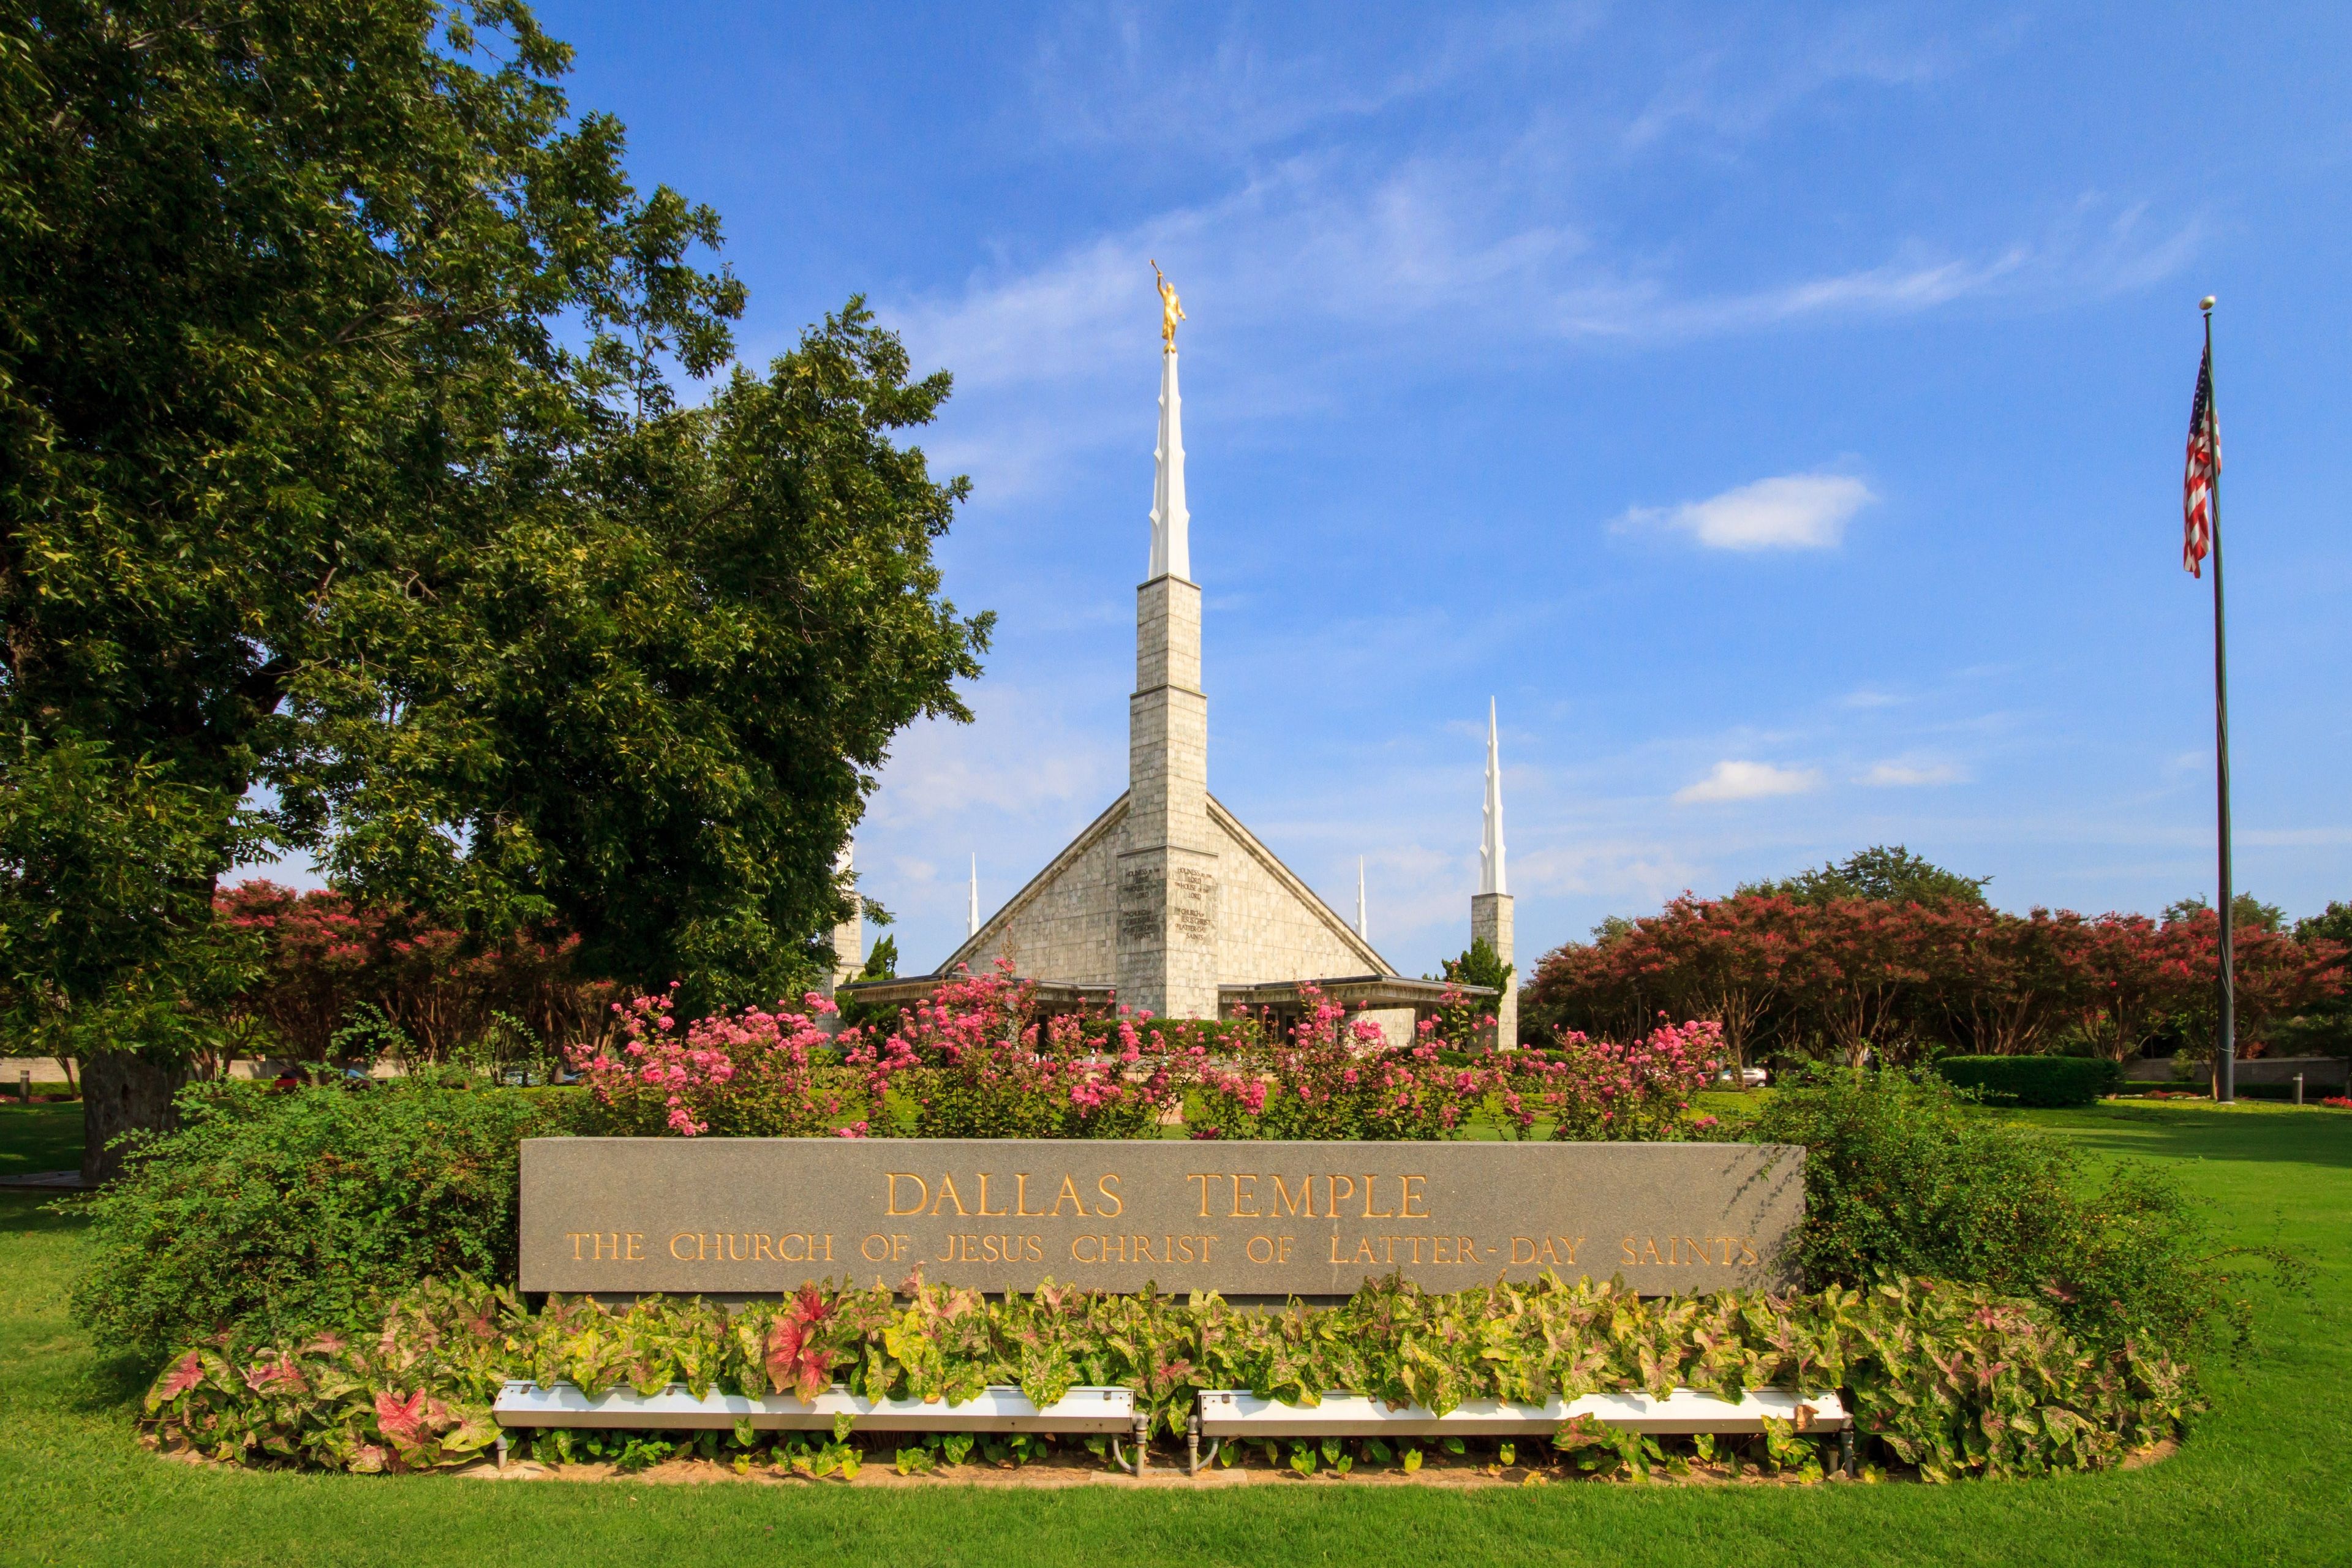 The temple name sign of the Dallas Texas Temple.